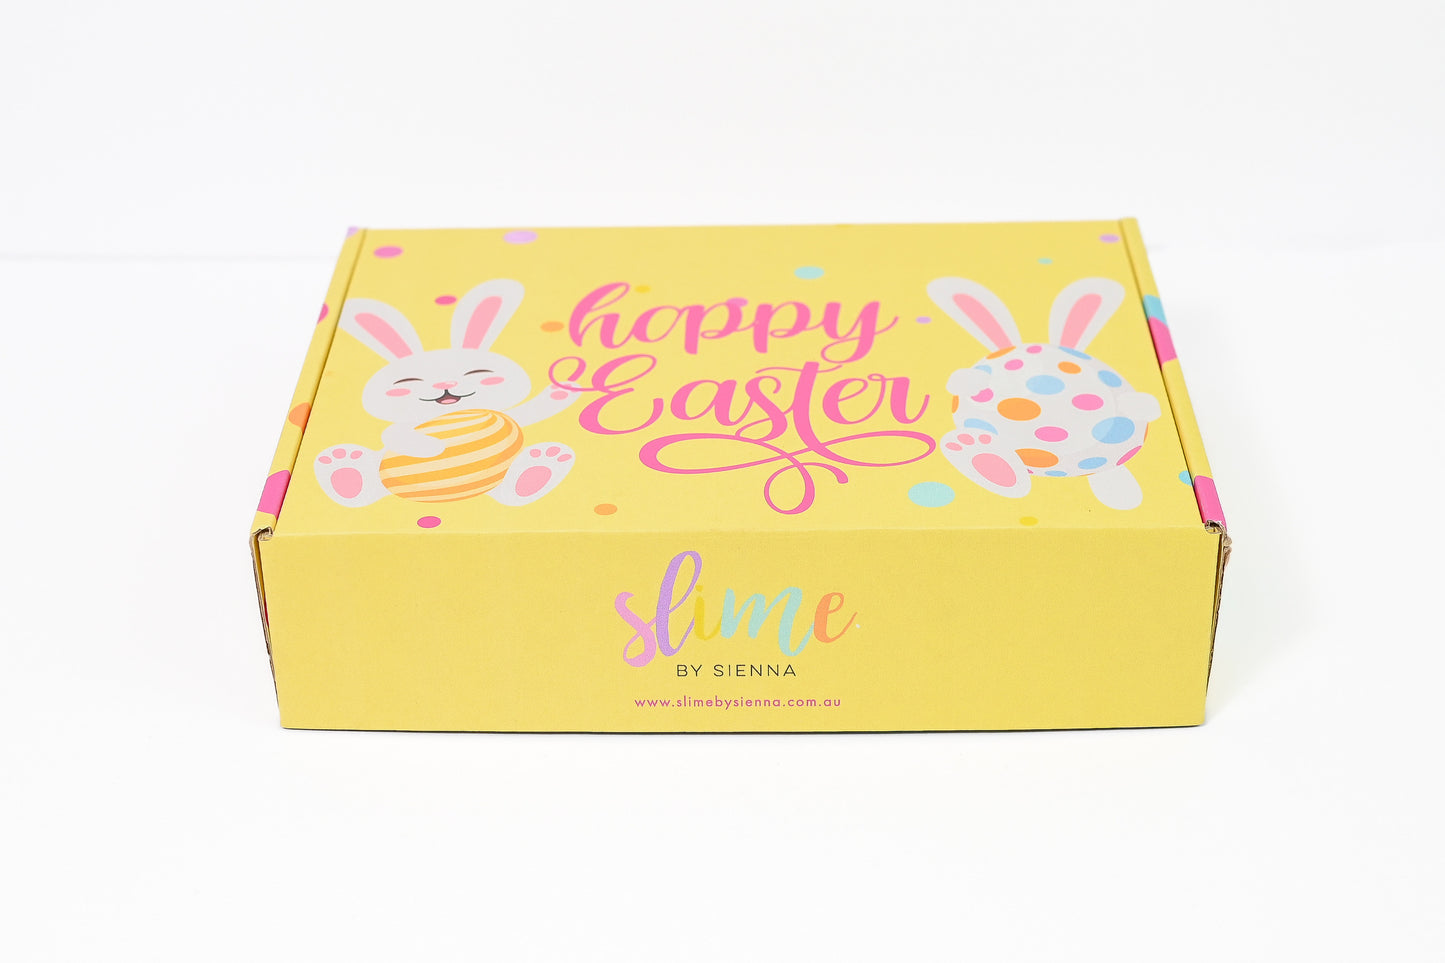 Hoppy Easter Limited Edition Box